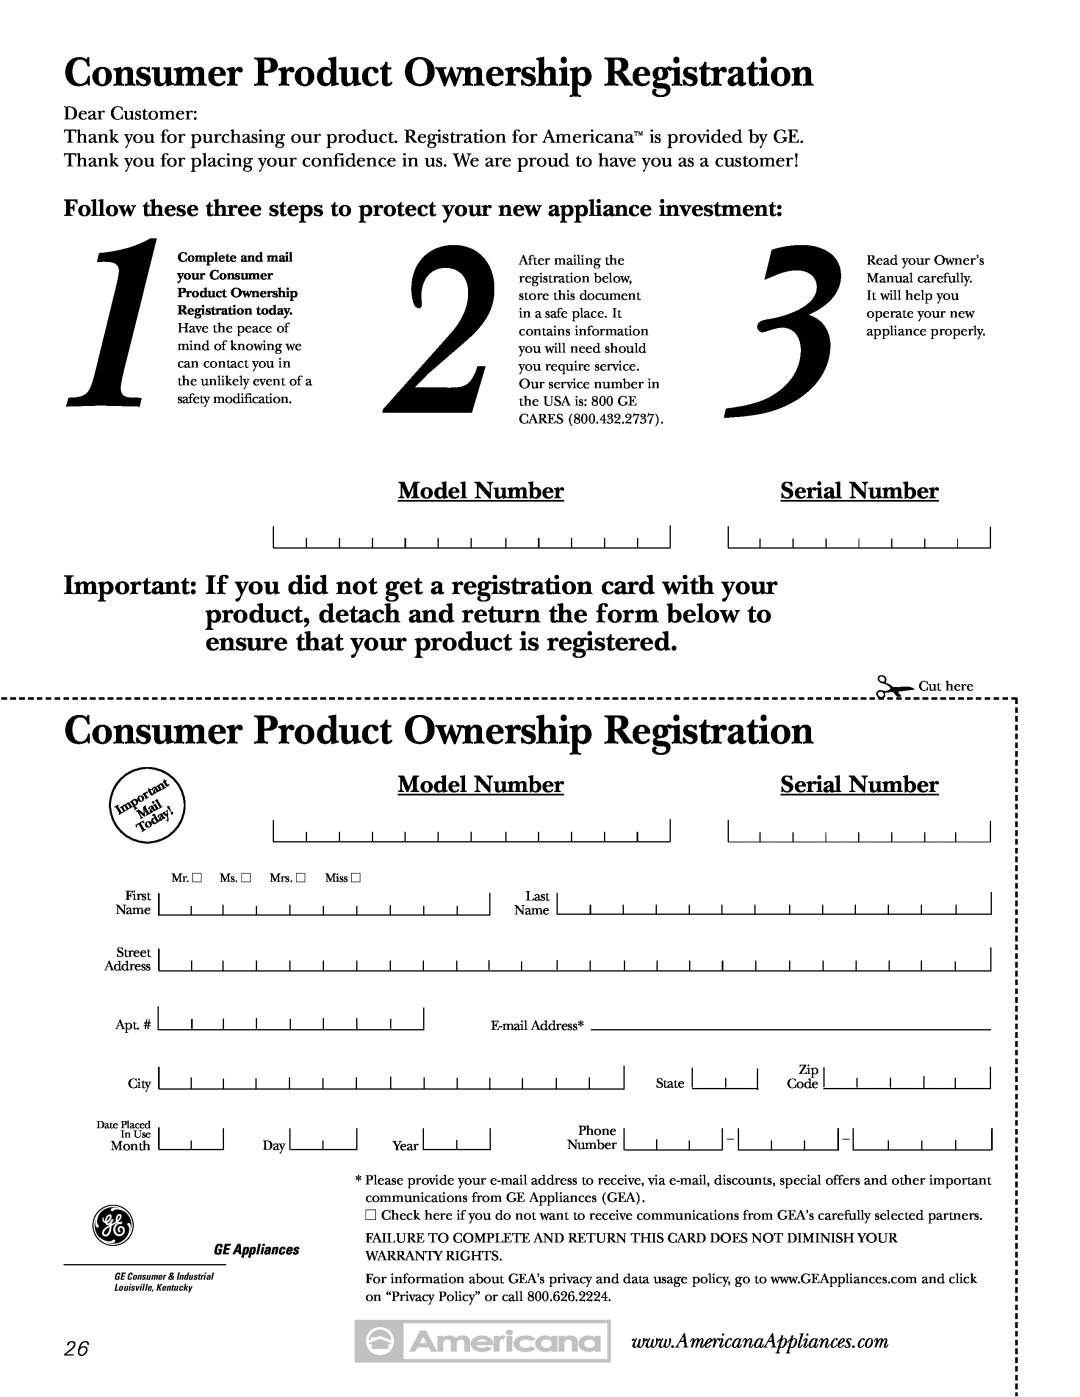 Americana Appliances 15 Model Number, Serial Number, Dear Customer, Consumer Product Ownership Registration, your Consumer 